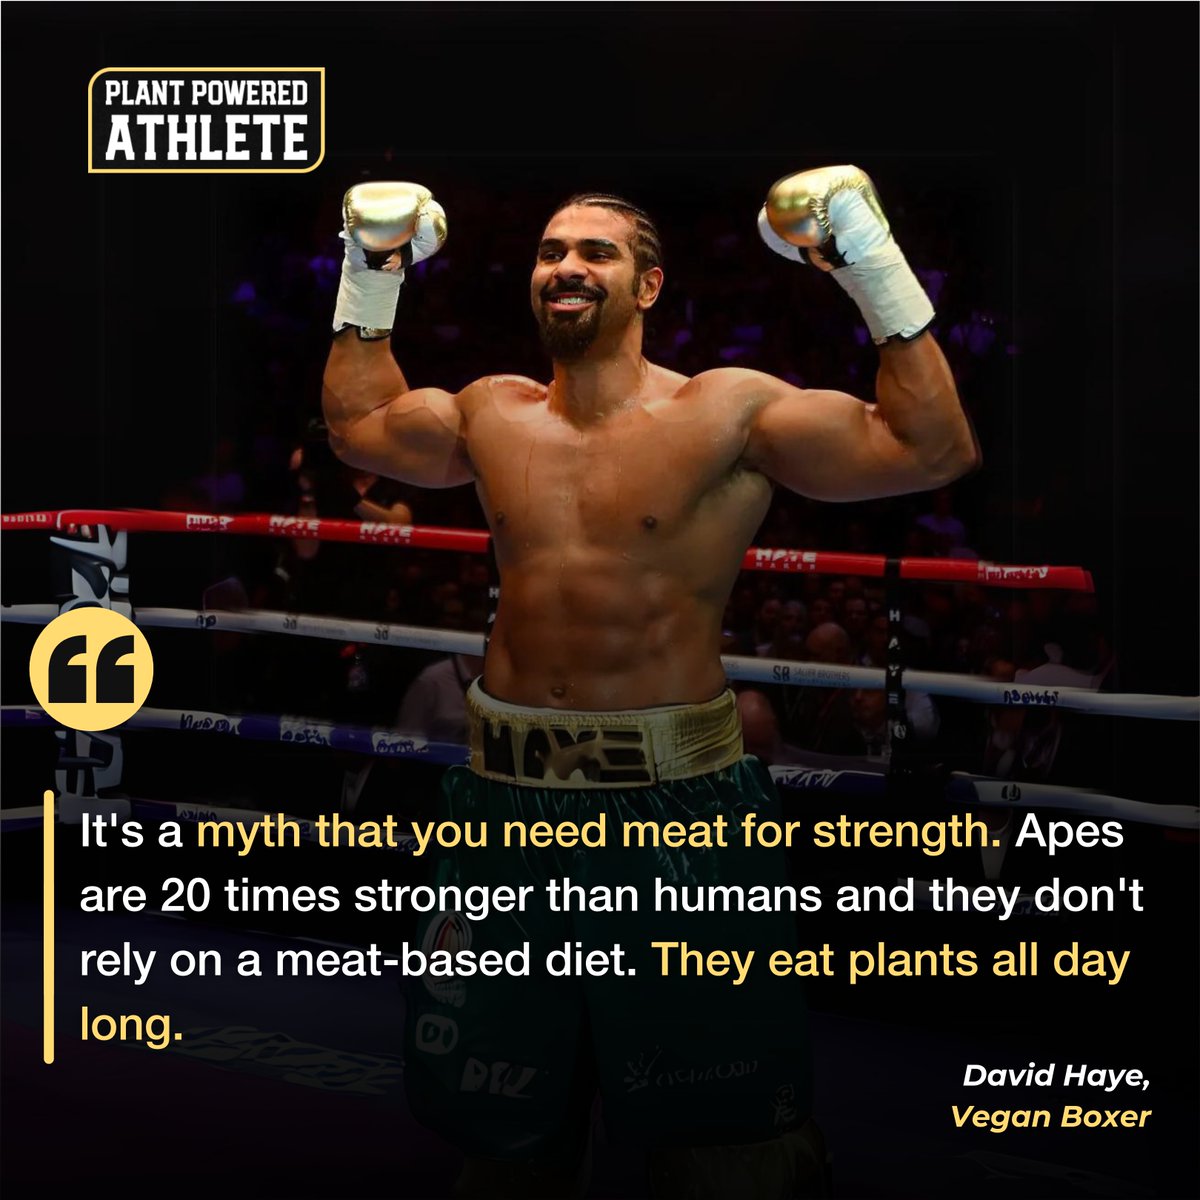 Knock out the myths with David Haye! 🥊🌱 

The heavyweight champ shows true strength doesn't come from meat. Channel the power of plants and go the distance in your fitness journey.

#plantpoweredathlete #plantbasedprotein #plantbasedcoach #plantpowered #plantbased #plantbuil...